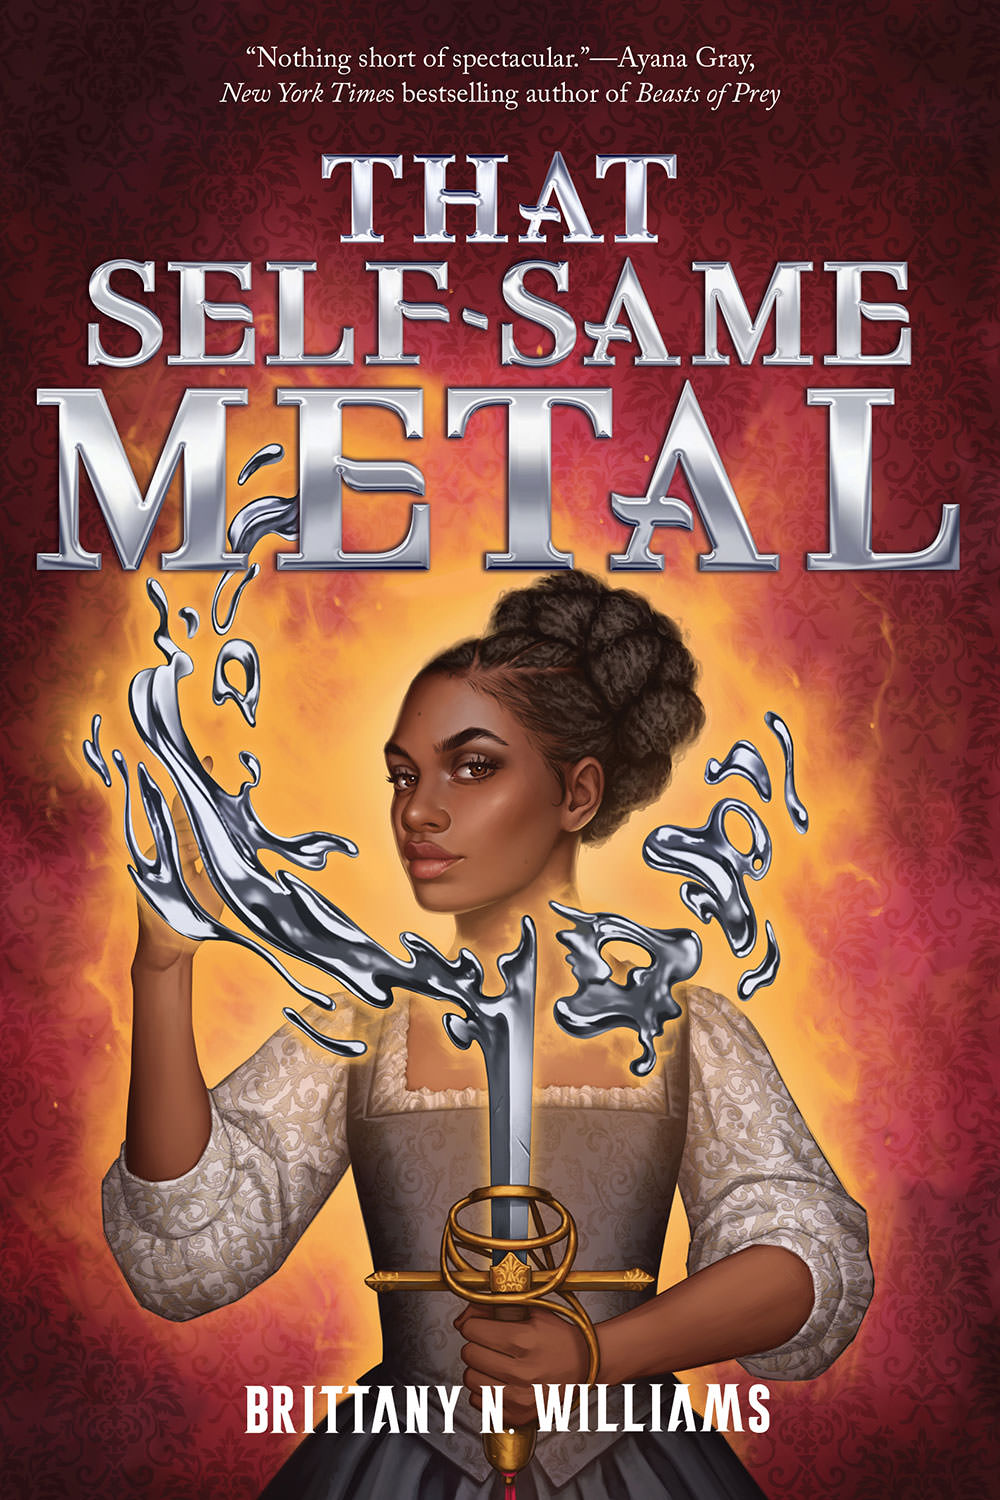 That Self-Same Metal - The Forge & Fracture Saga, Book 1 - Brittany N. Williams